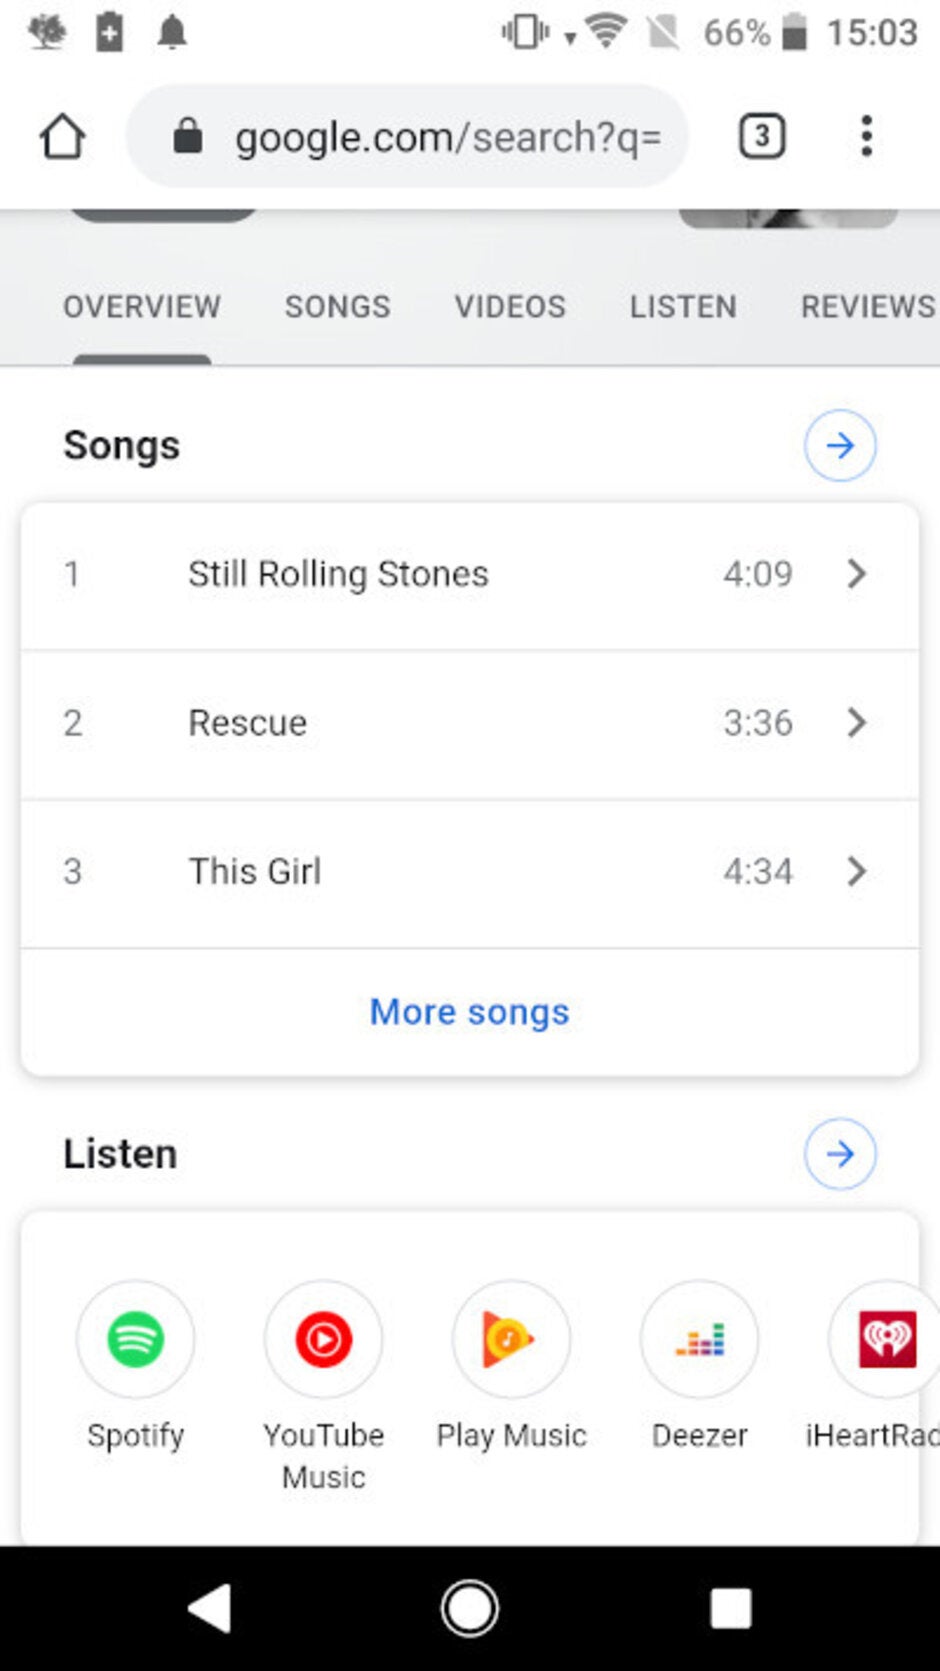 Mobile view - YouTube Music now gets featured alongside Spotify and Google Play Music in search results